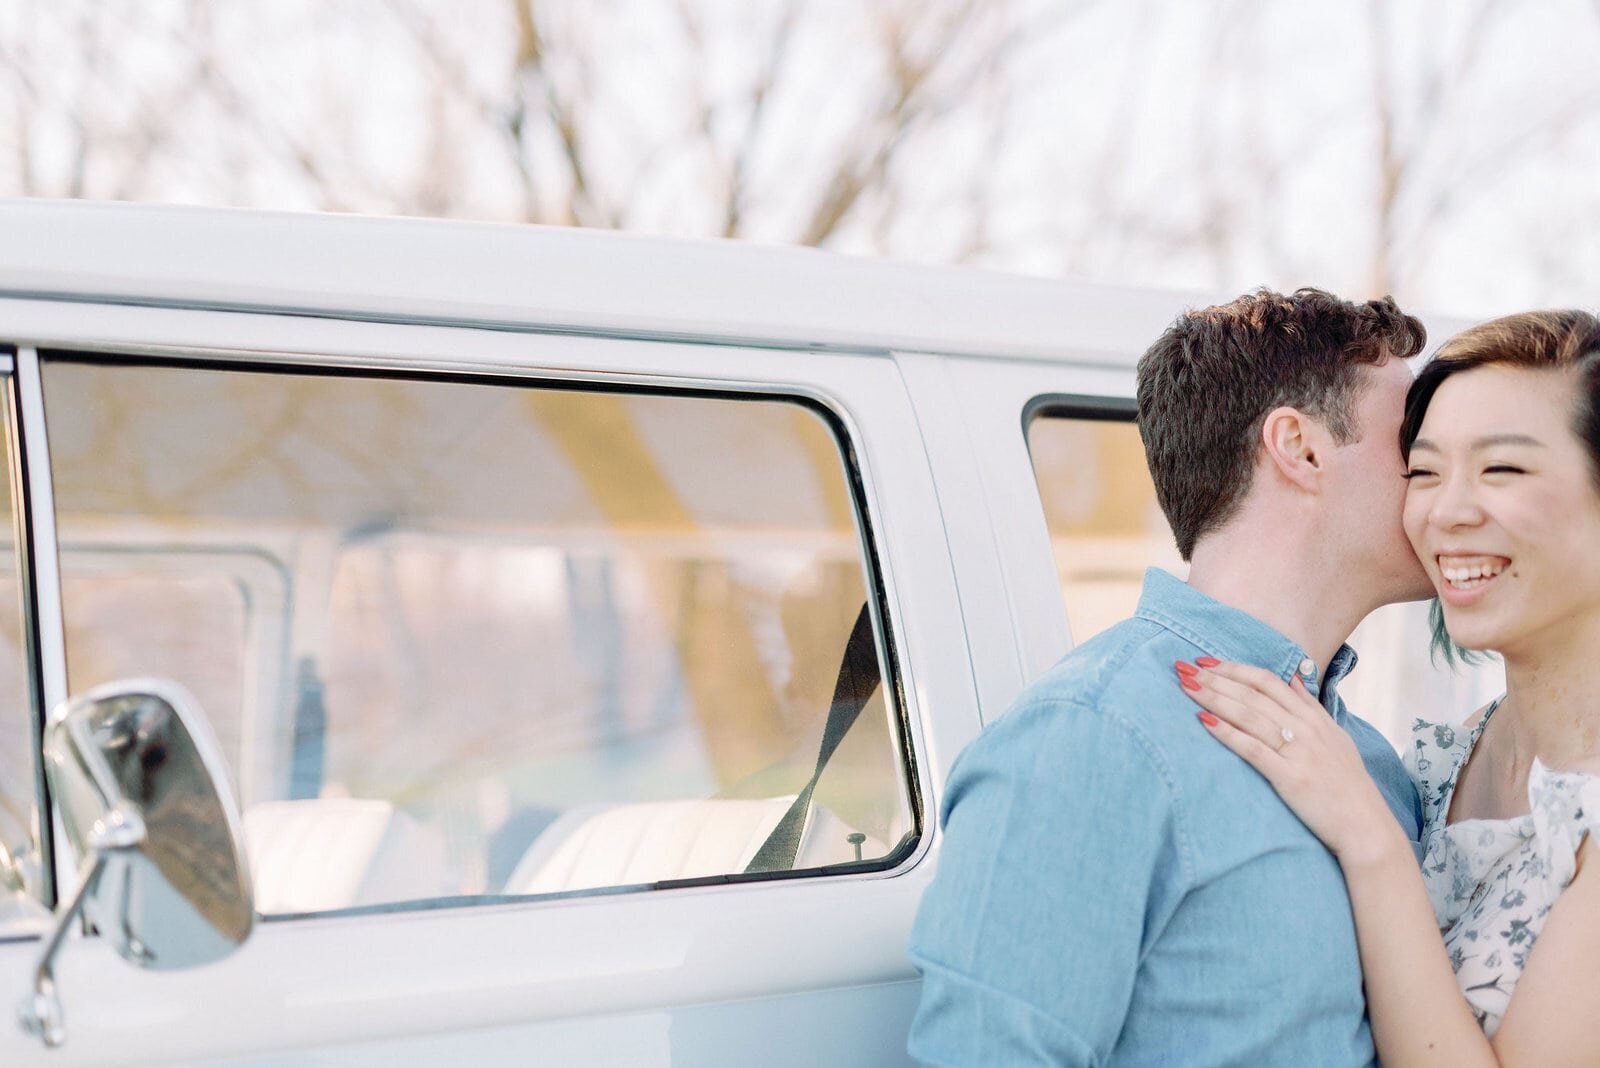 couples embrace at cherry beach toronto engagement withwendy sewing youtube volkswagen camper van jacqueline james photography